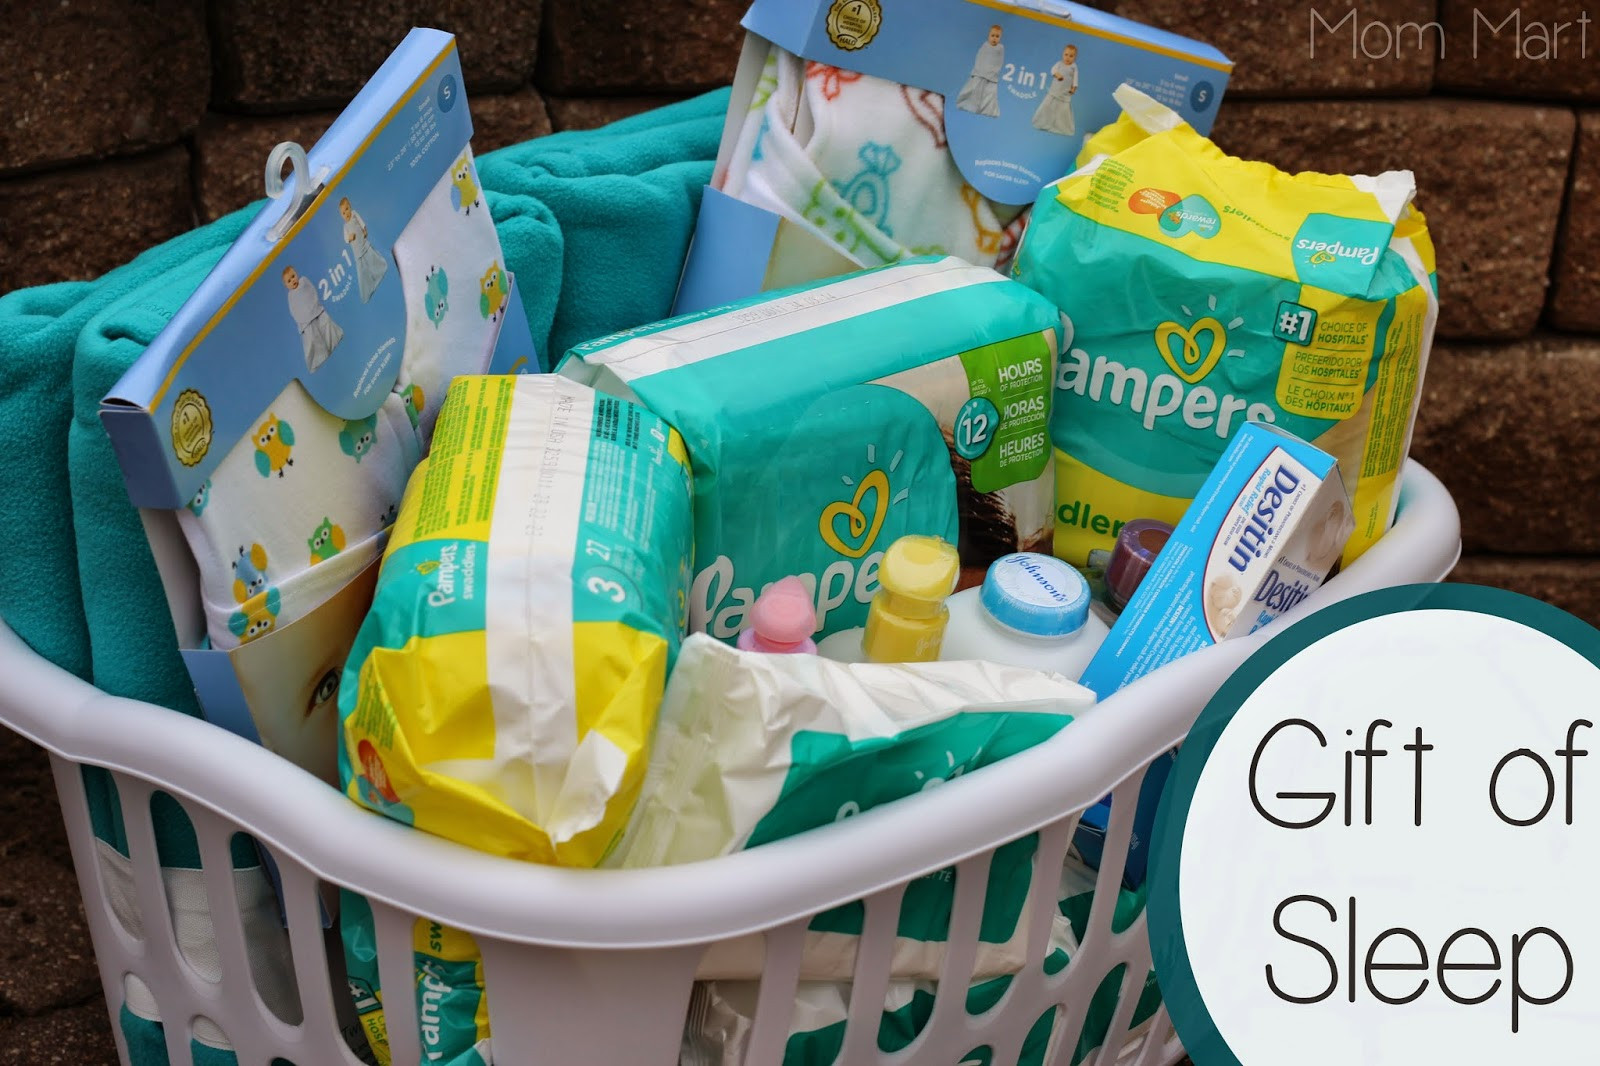 Pamper Gift Basket Ideas
 Mom Mart Giving the Gift of Sleep with Pampers & Giveaway